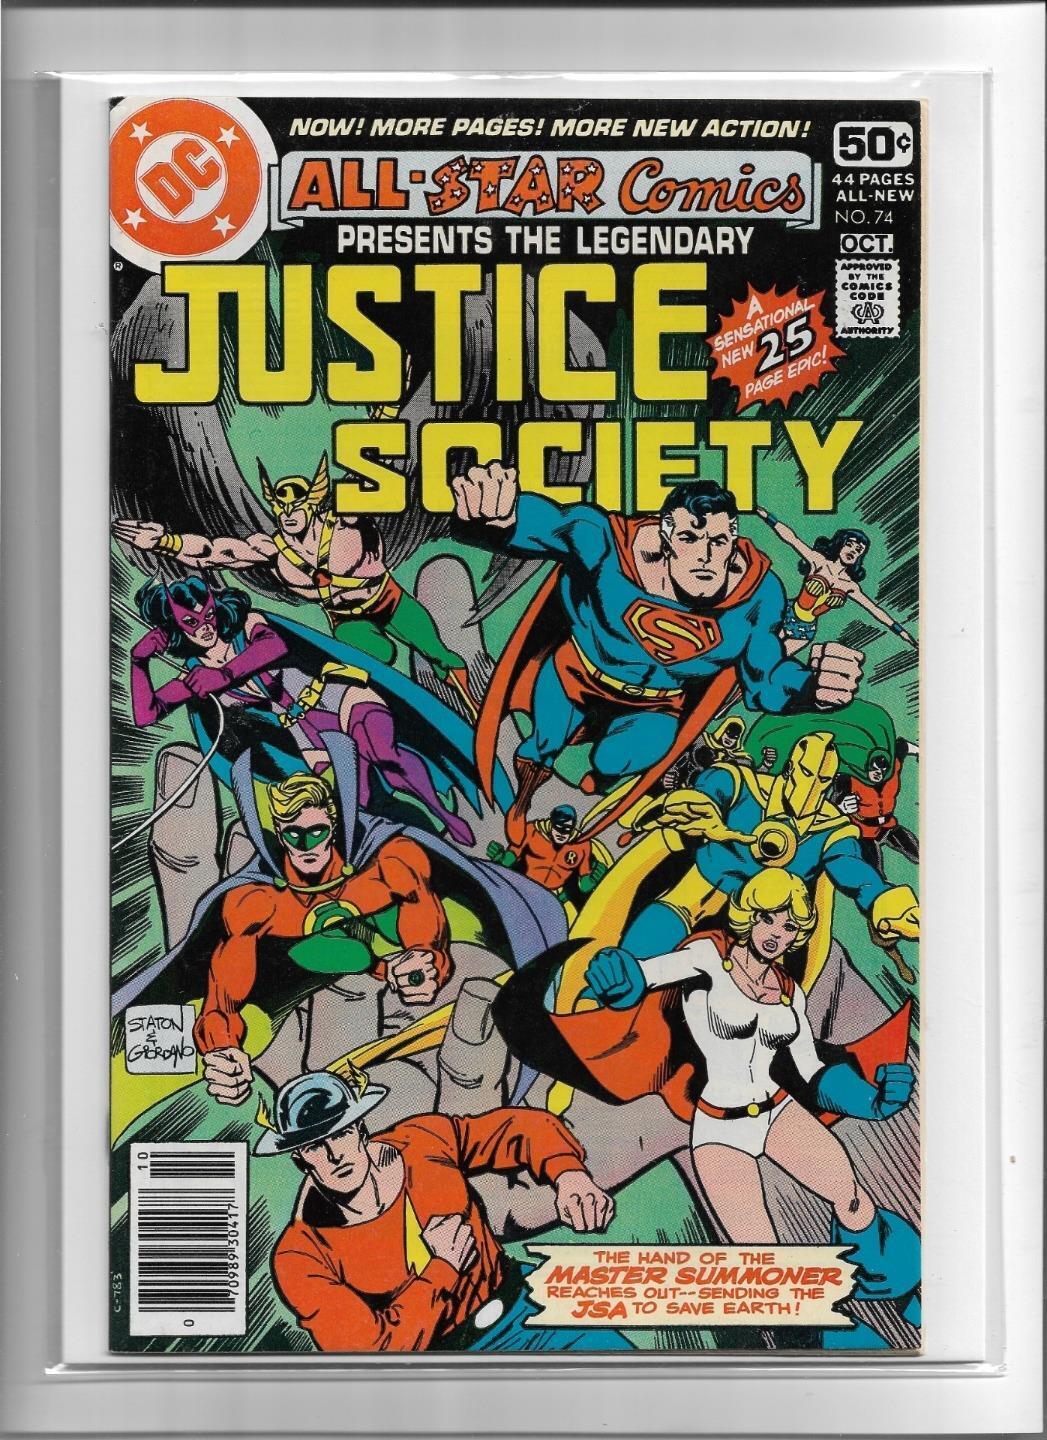 ALL-STAR COMICS #74 1978 VERY FINE+ 8.5 4440 JUSTICE SOCIETY OF AMERICA